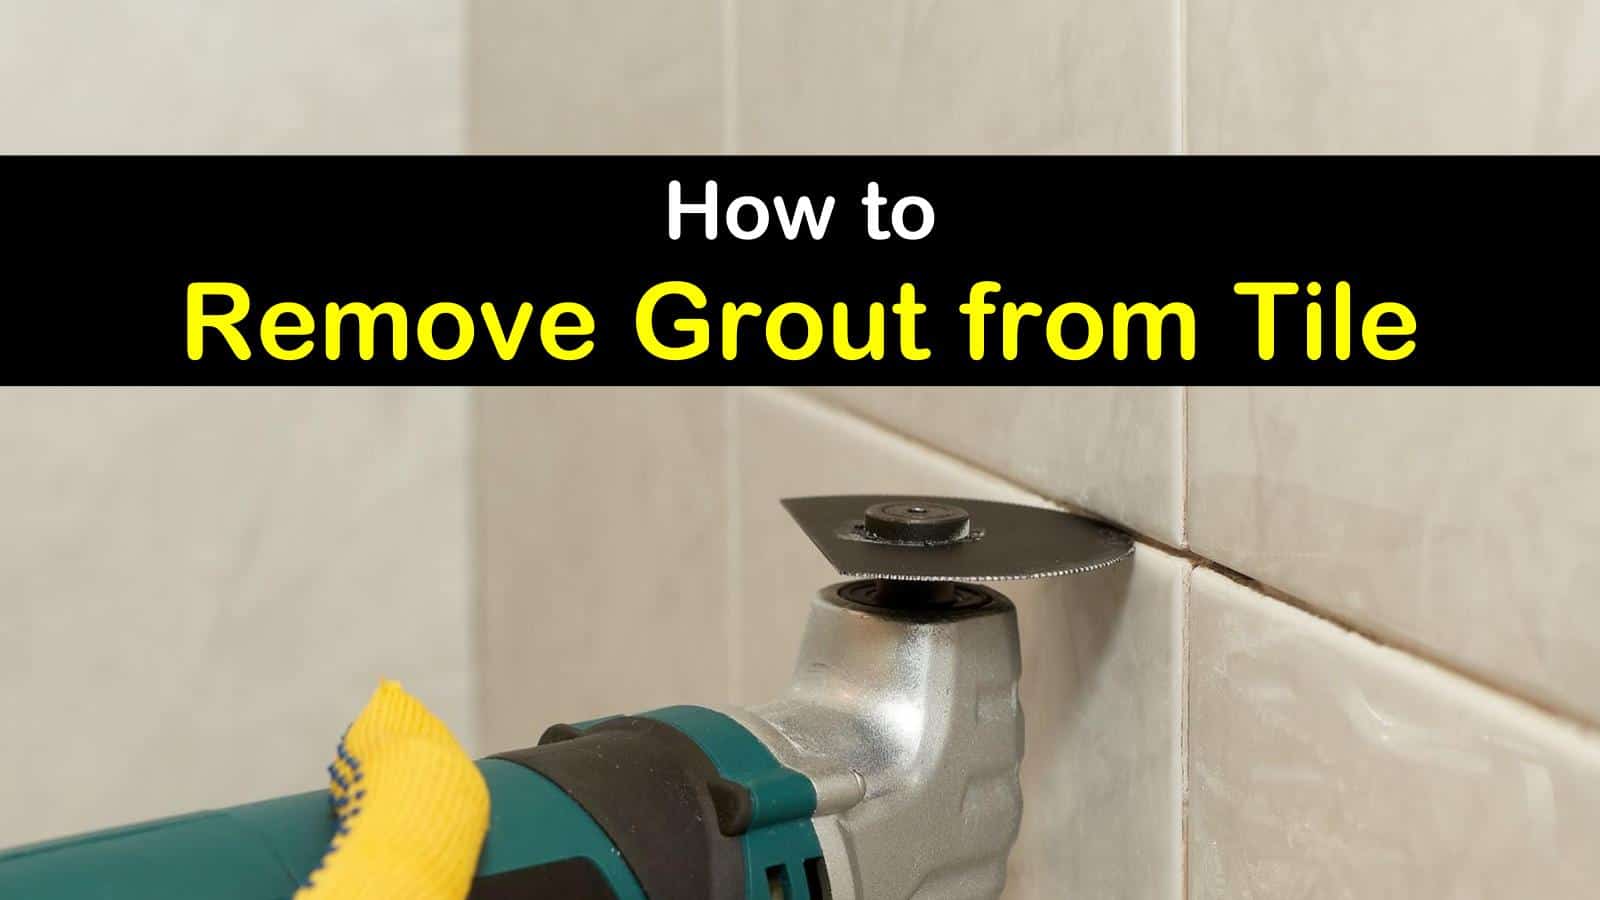 15+ Crafty Ways to Remove Grout from Tile